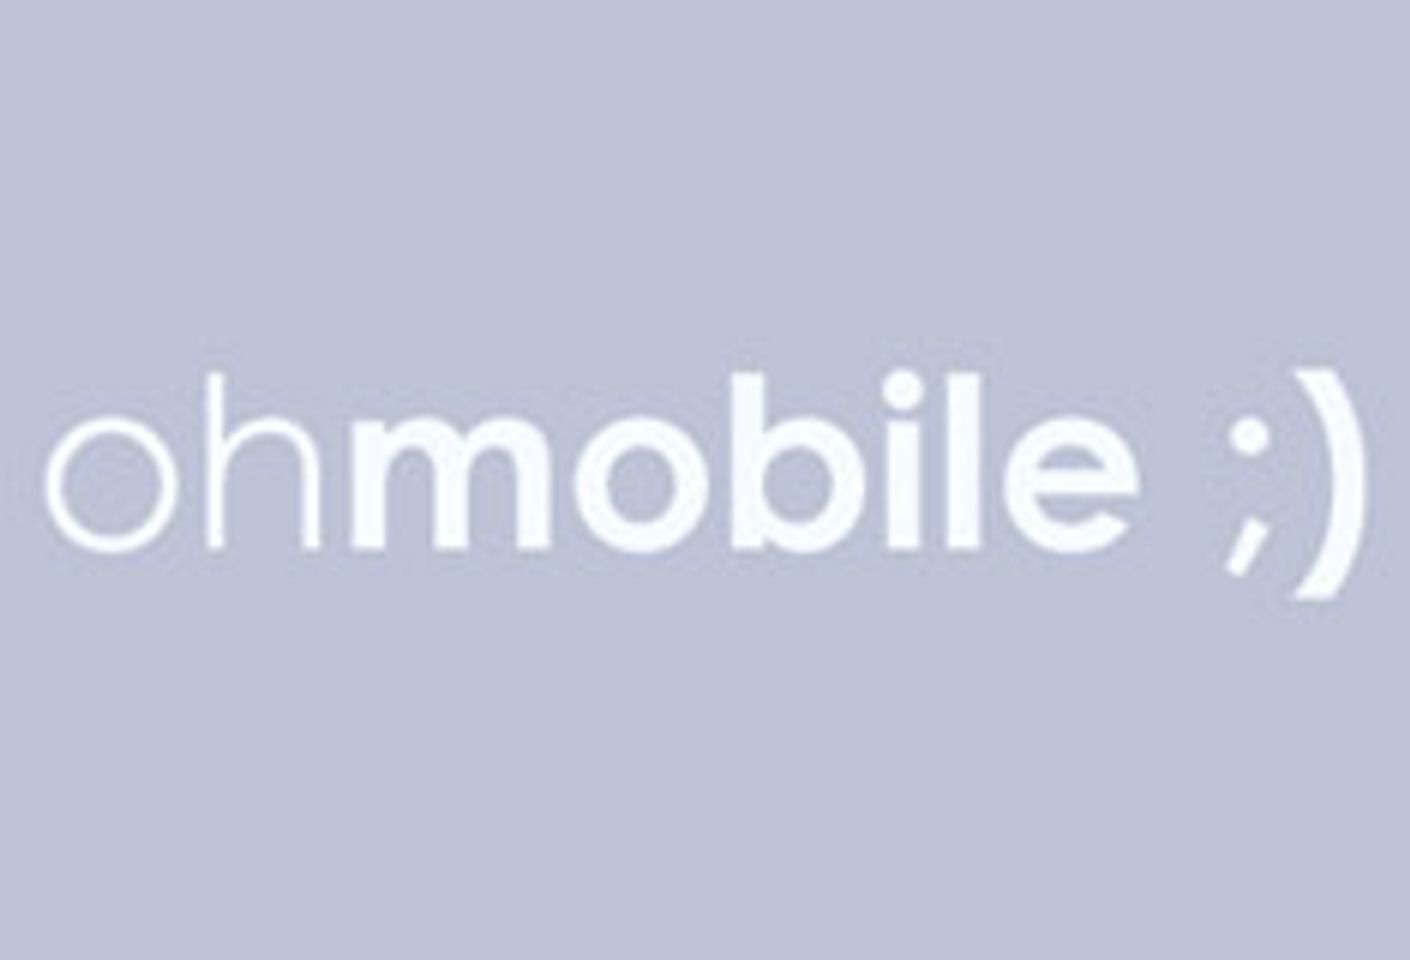 CECash and OhMobile Partner for Mobile Erotica